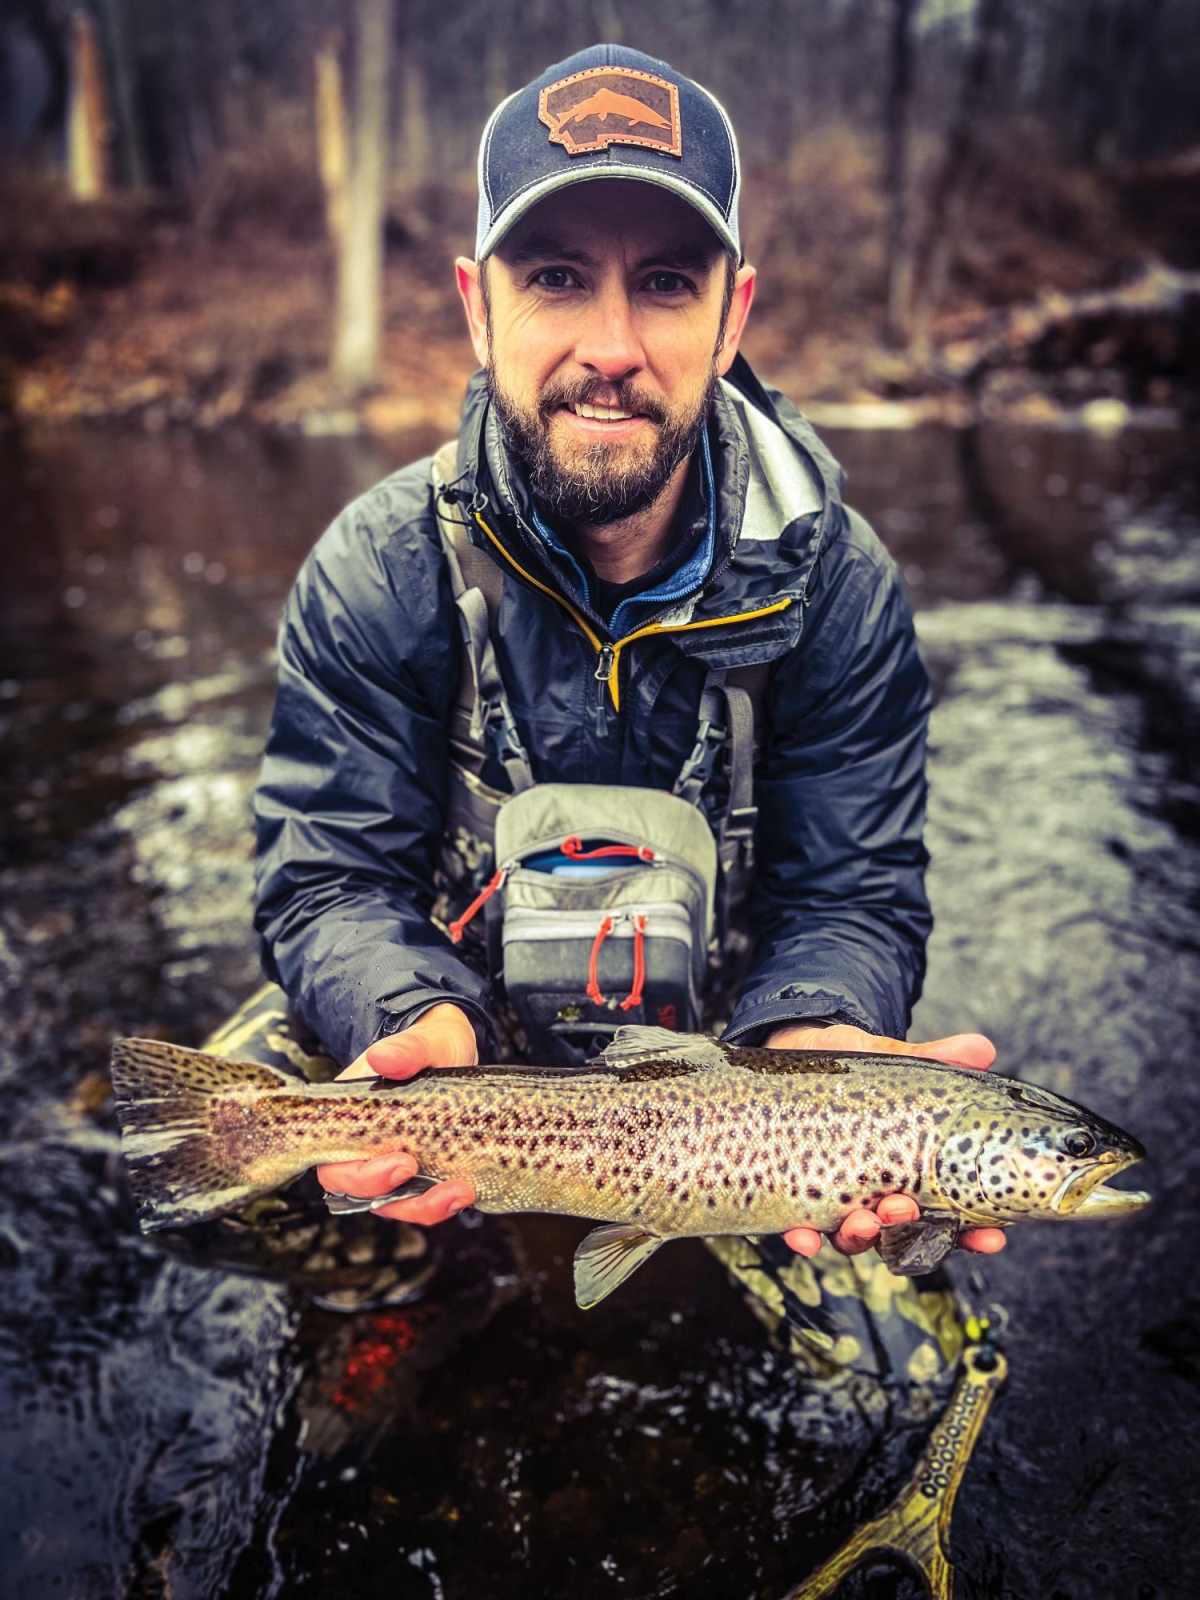 The Orvis Guide to Fly Fishing - Episode 3 - Euro Nymphing featuring George  Daniel  Join host Tom Rosenbauer of Orvis and guide, author, Penn State  Fly Fishing Instructor and Fly